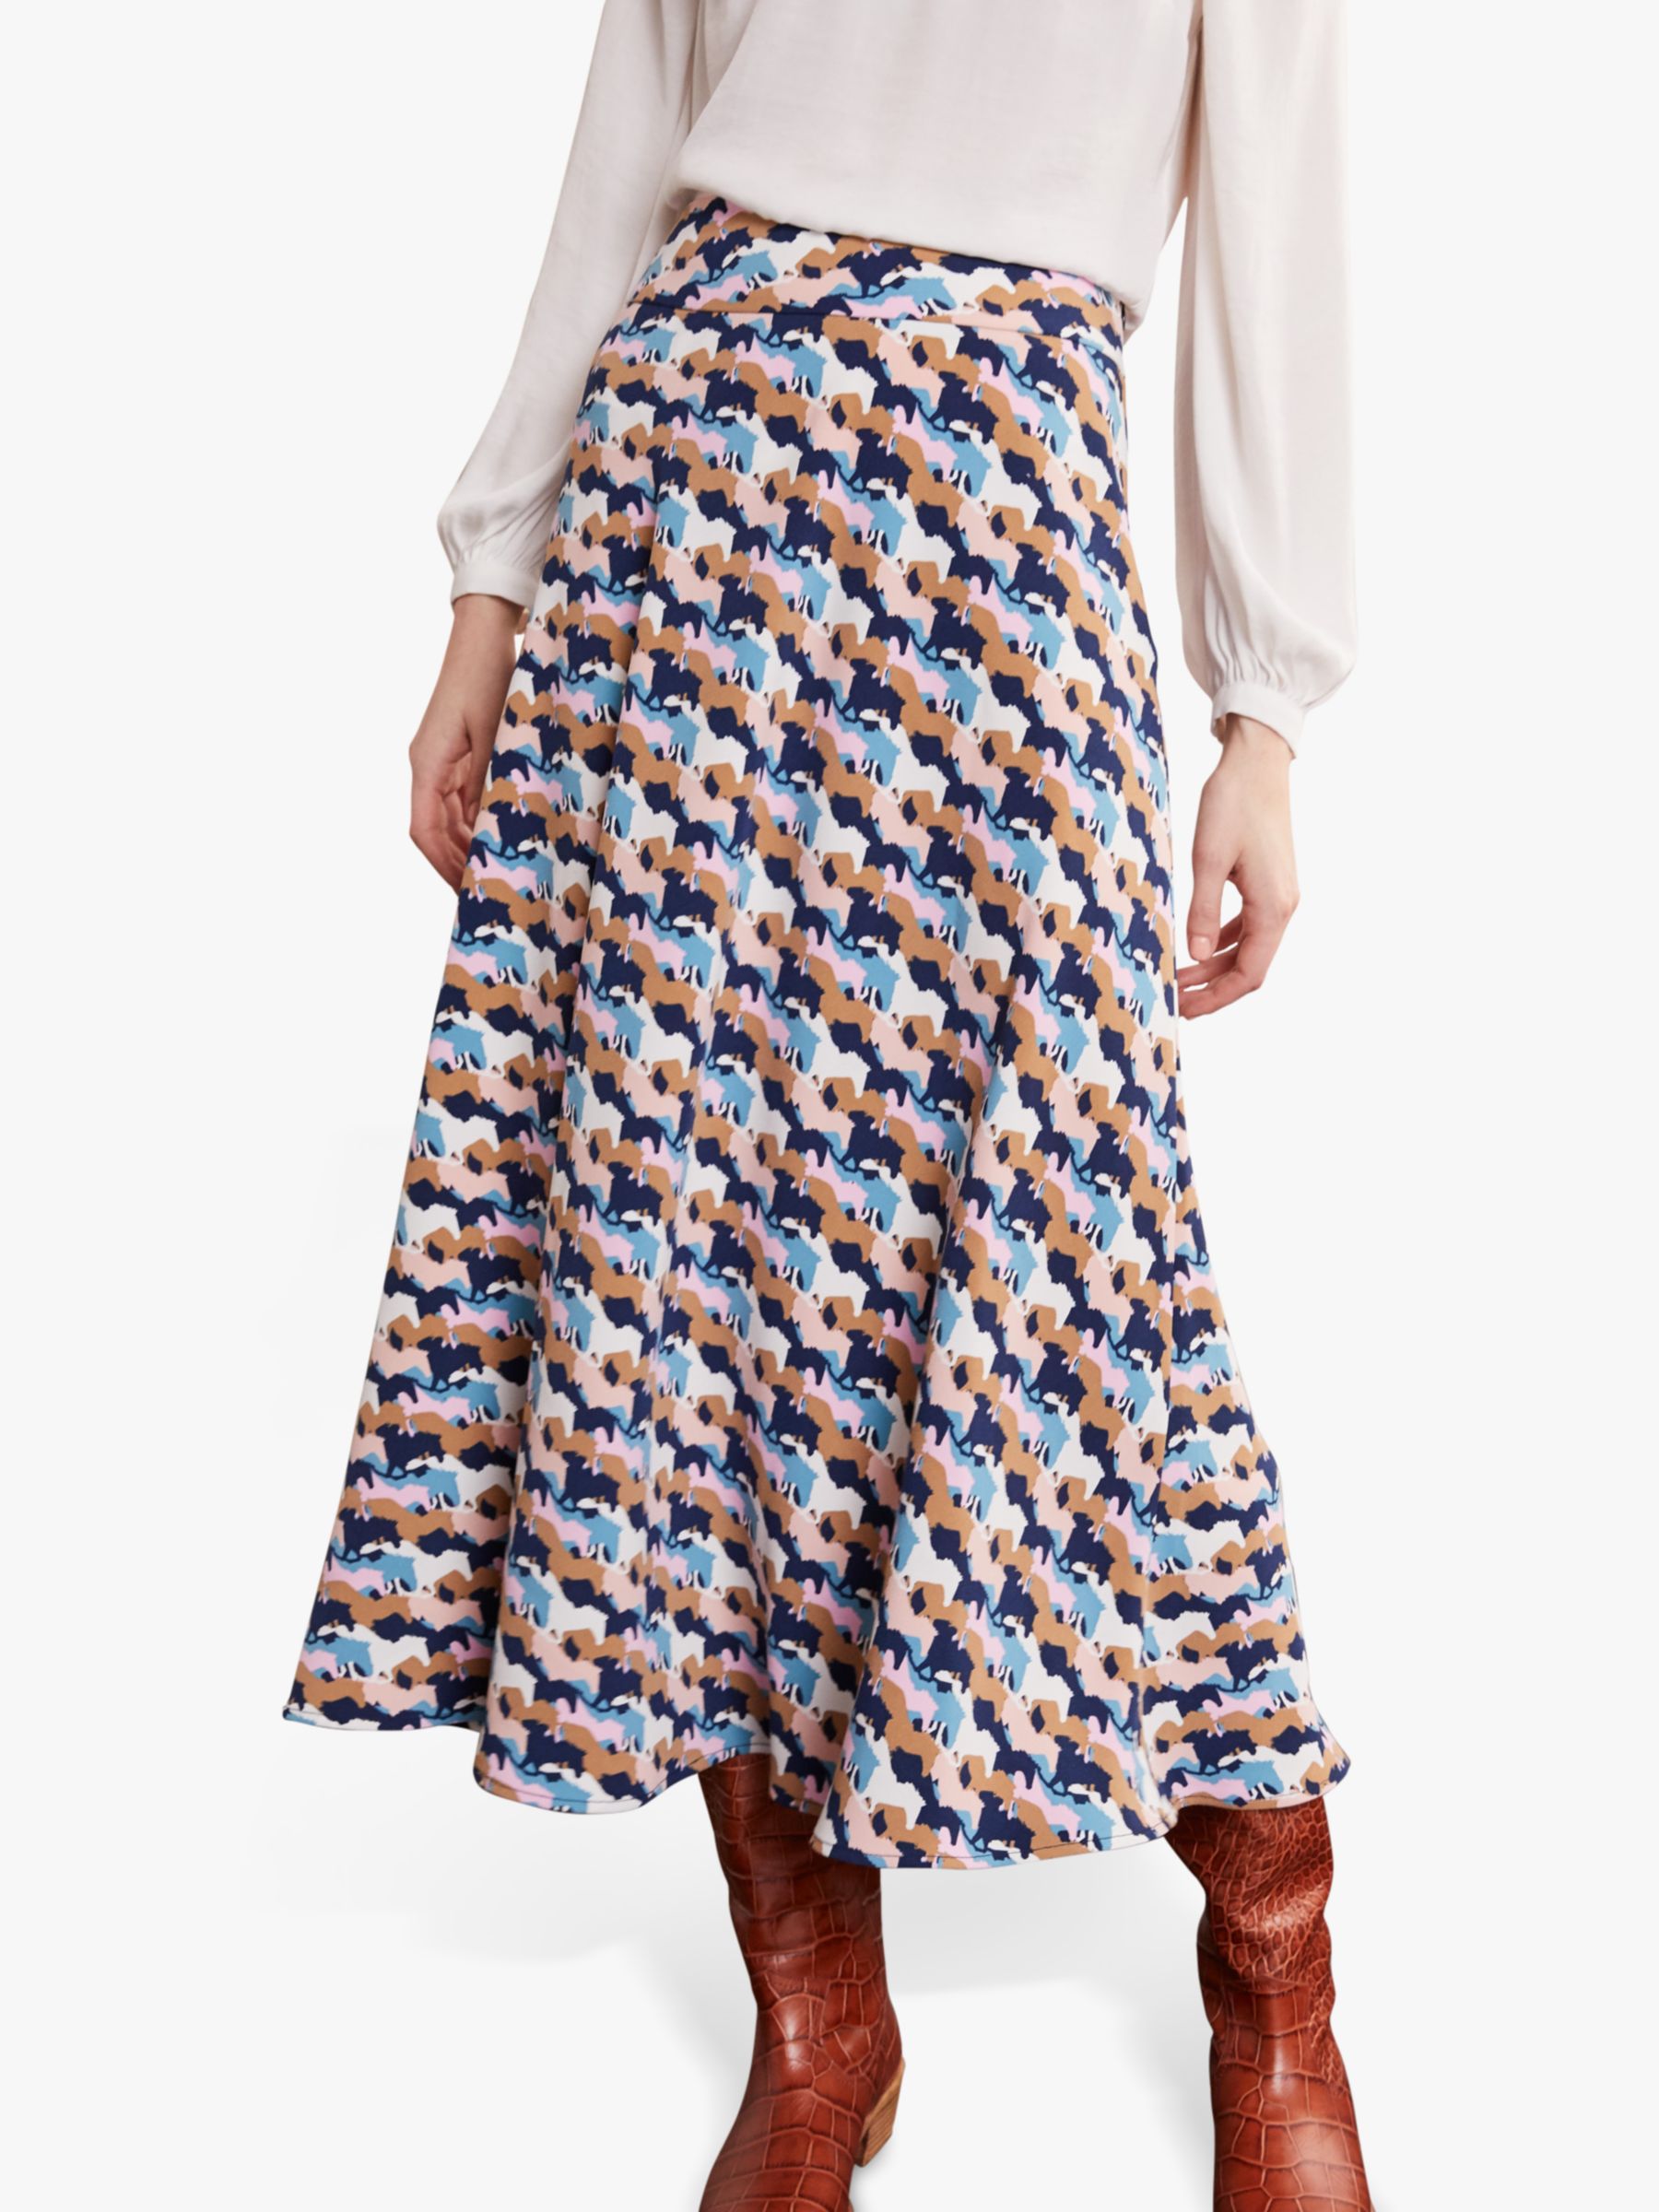 Boden Stackpole Abstract Carousel Print Midi Skirt, French Navy/Multi